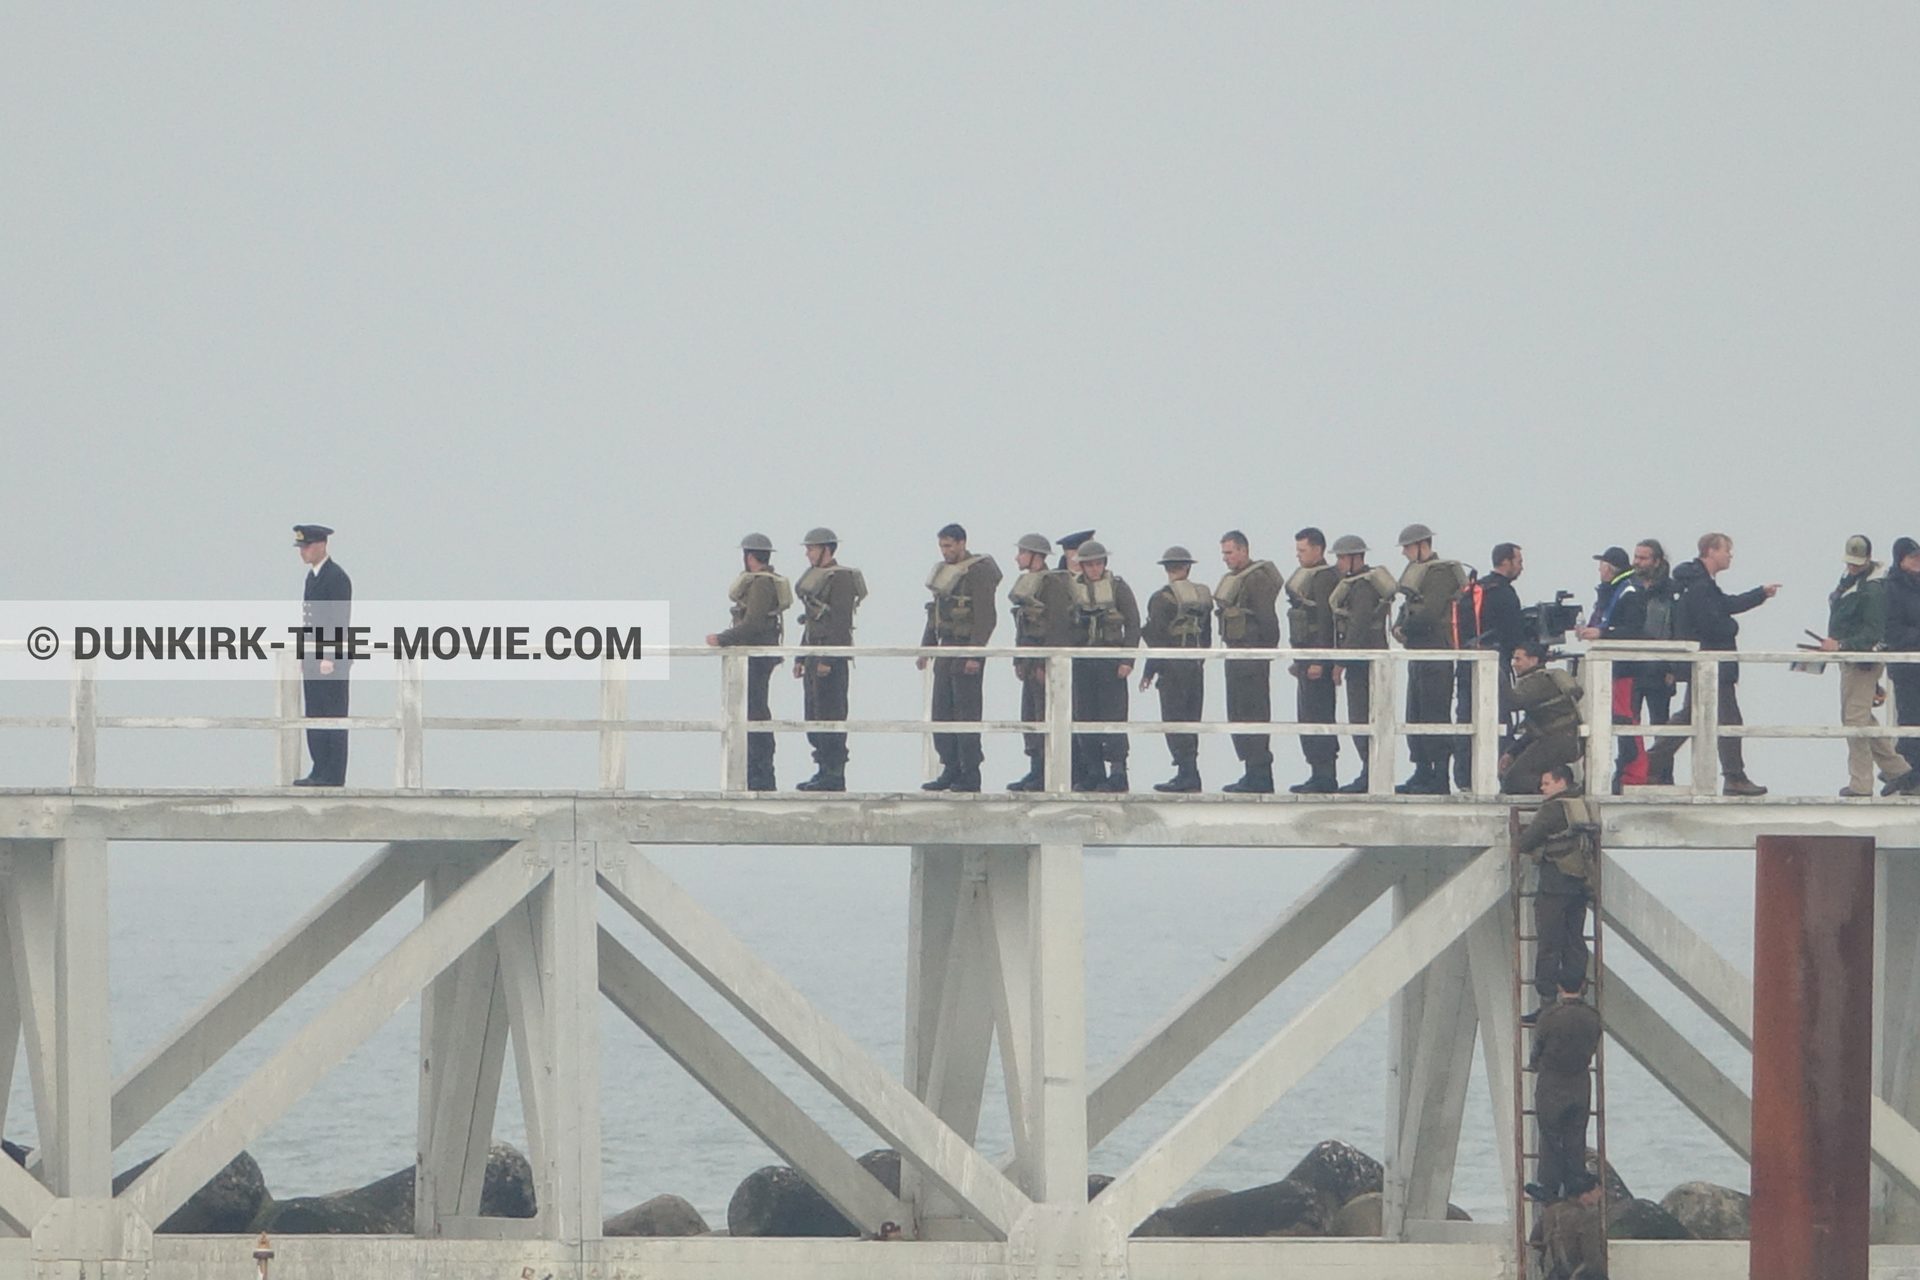 Picture with actor, grey sky, supernumeraries, Hoyte van Hoytema, EST pier, Christopher Nolan,  from behind the scene of the Dunkirk movie by Nolan